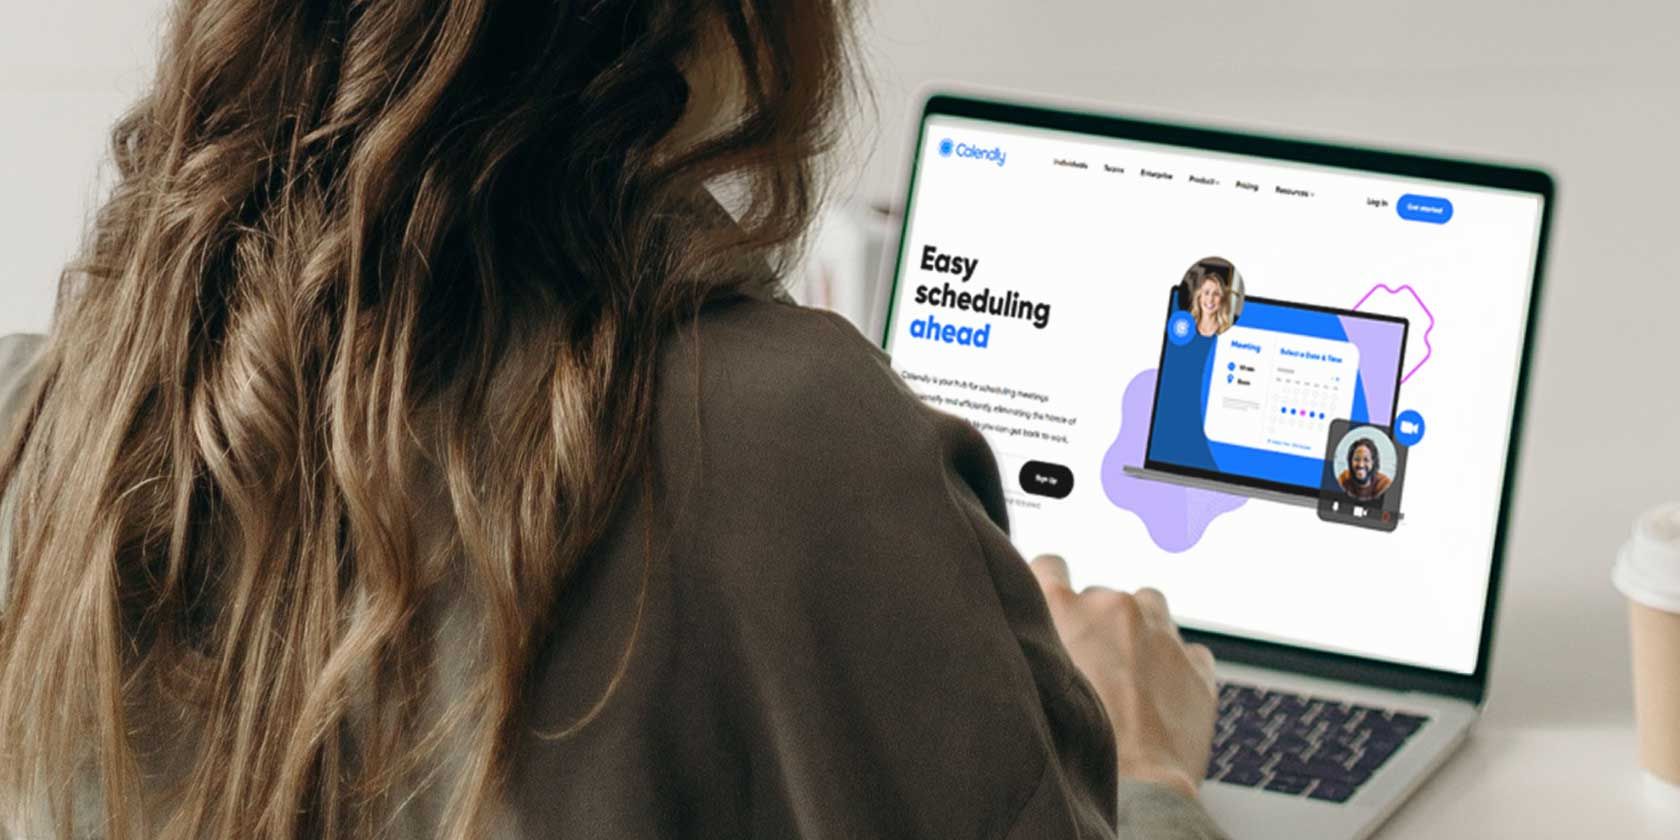 Woman using the Calendly app to schedule an appointment on her laptop.